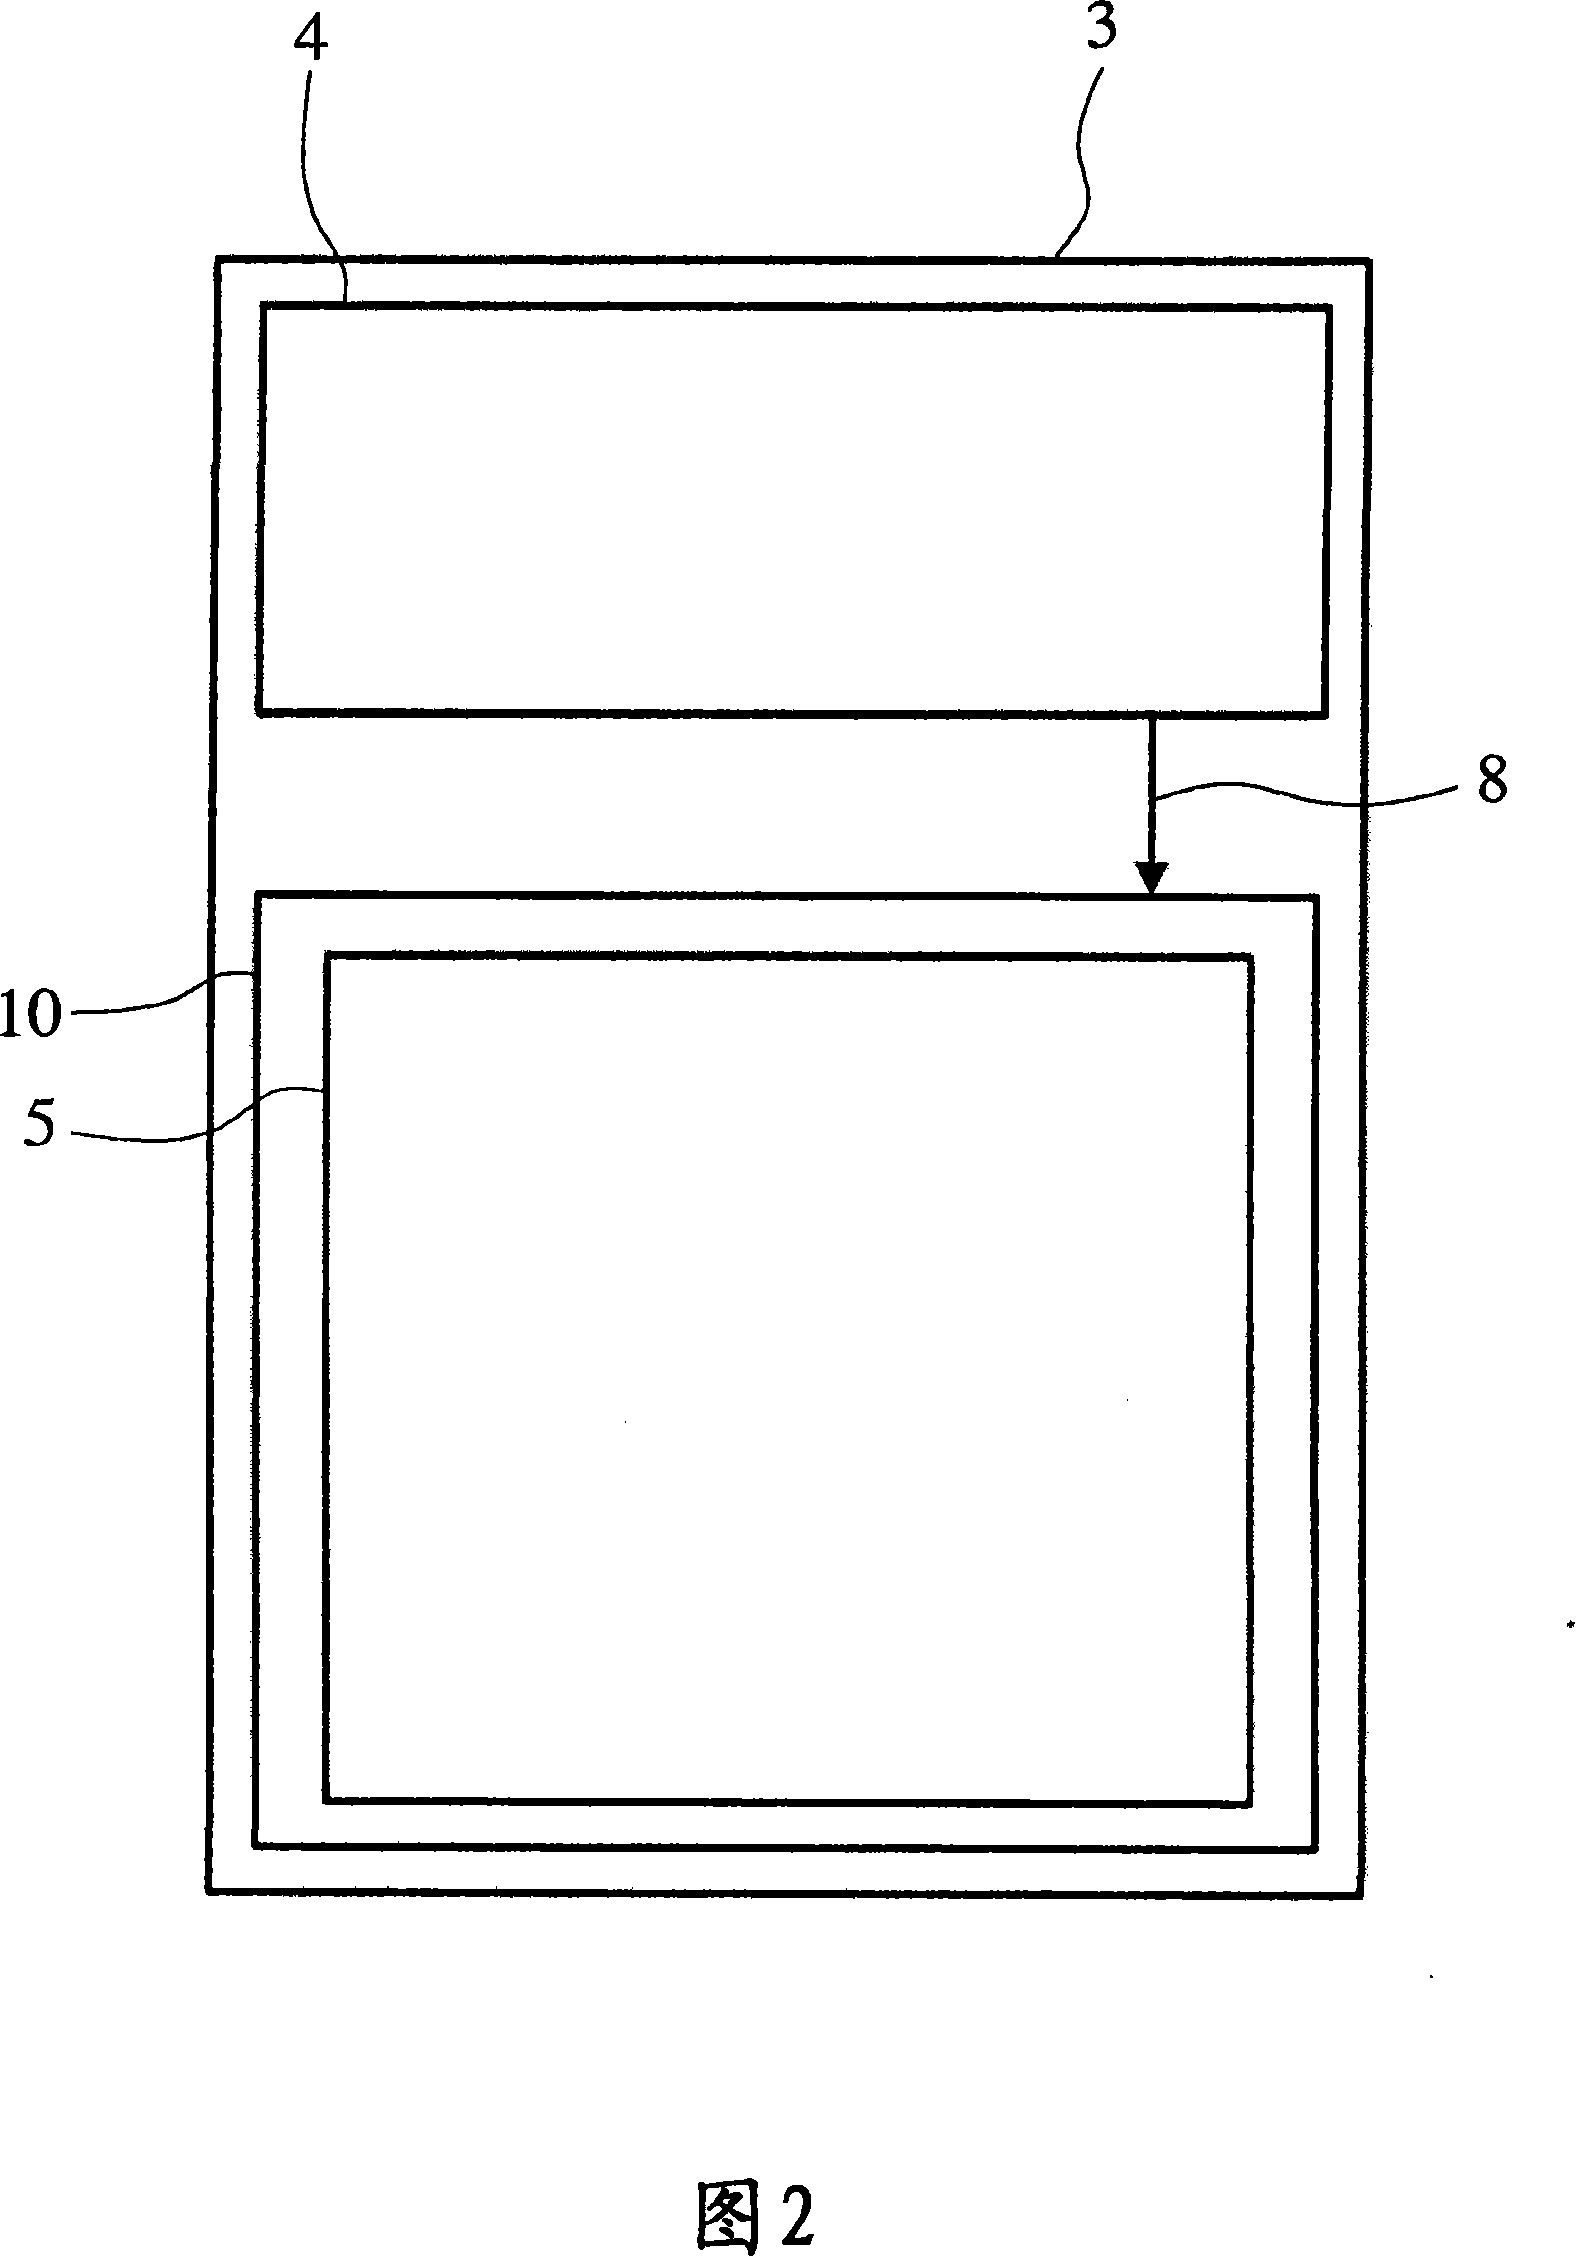 Method of testing an electronic control system